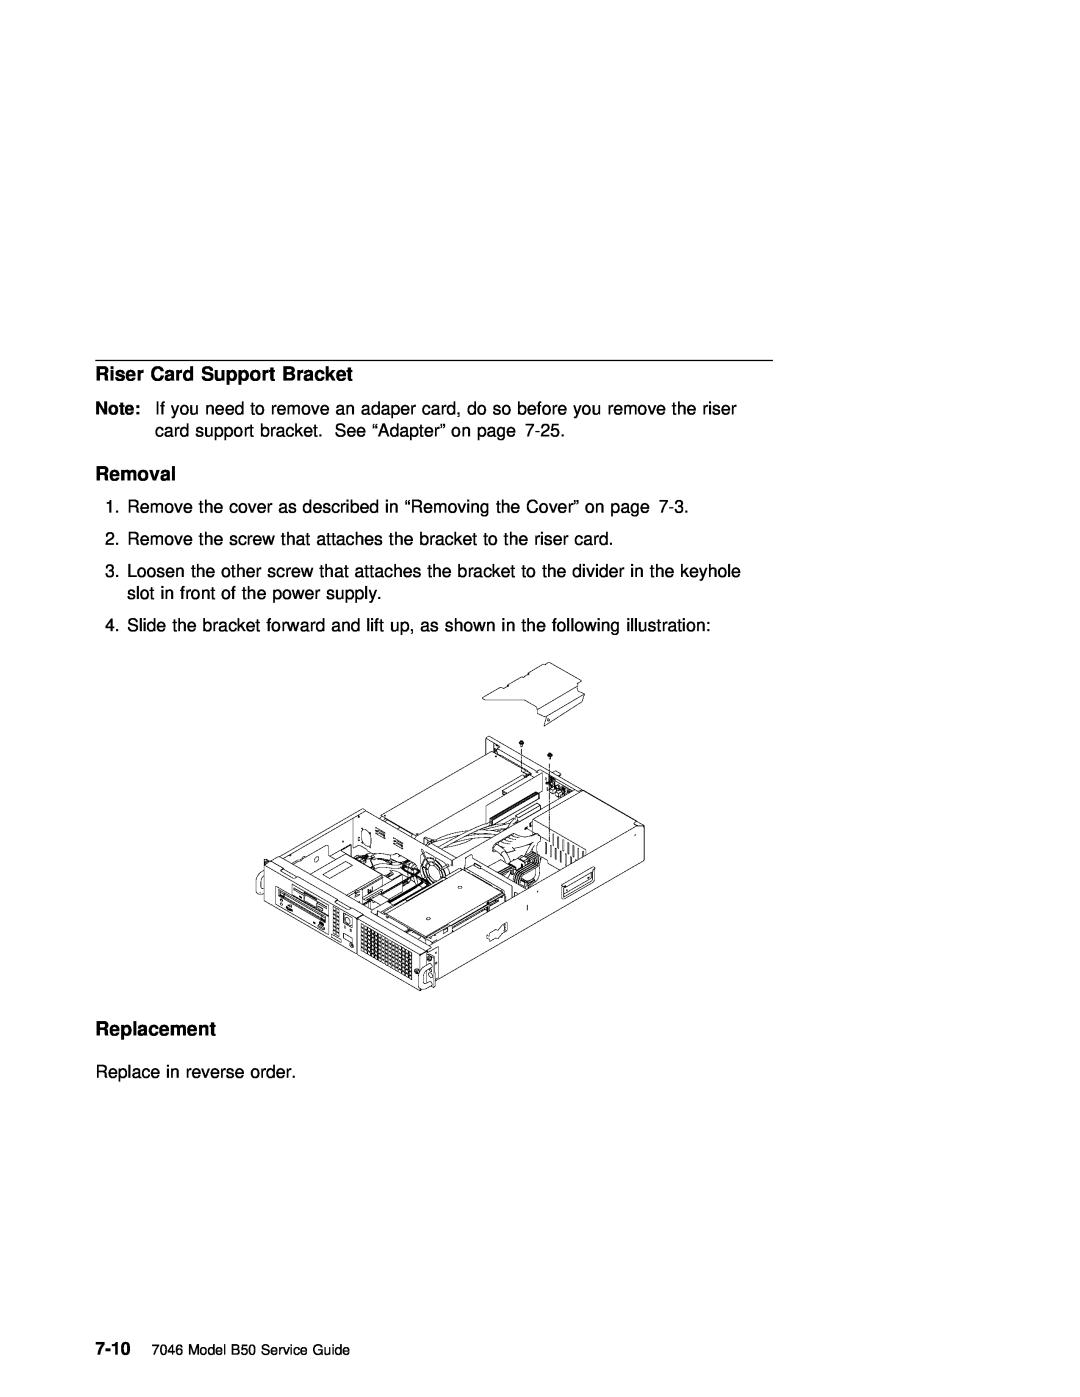 IBM manual Riser Card Support Bracket, Removal, Replacement, 7-10 7046 Model B50 Service Guide 